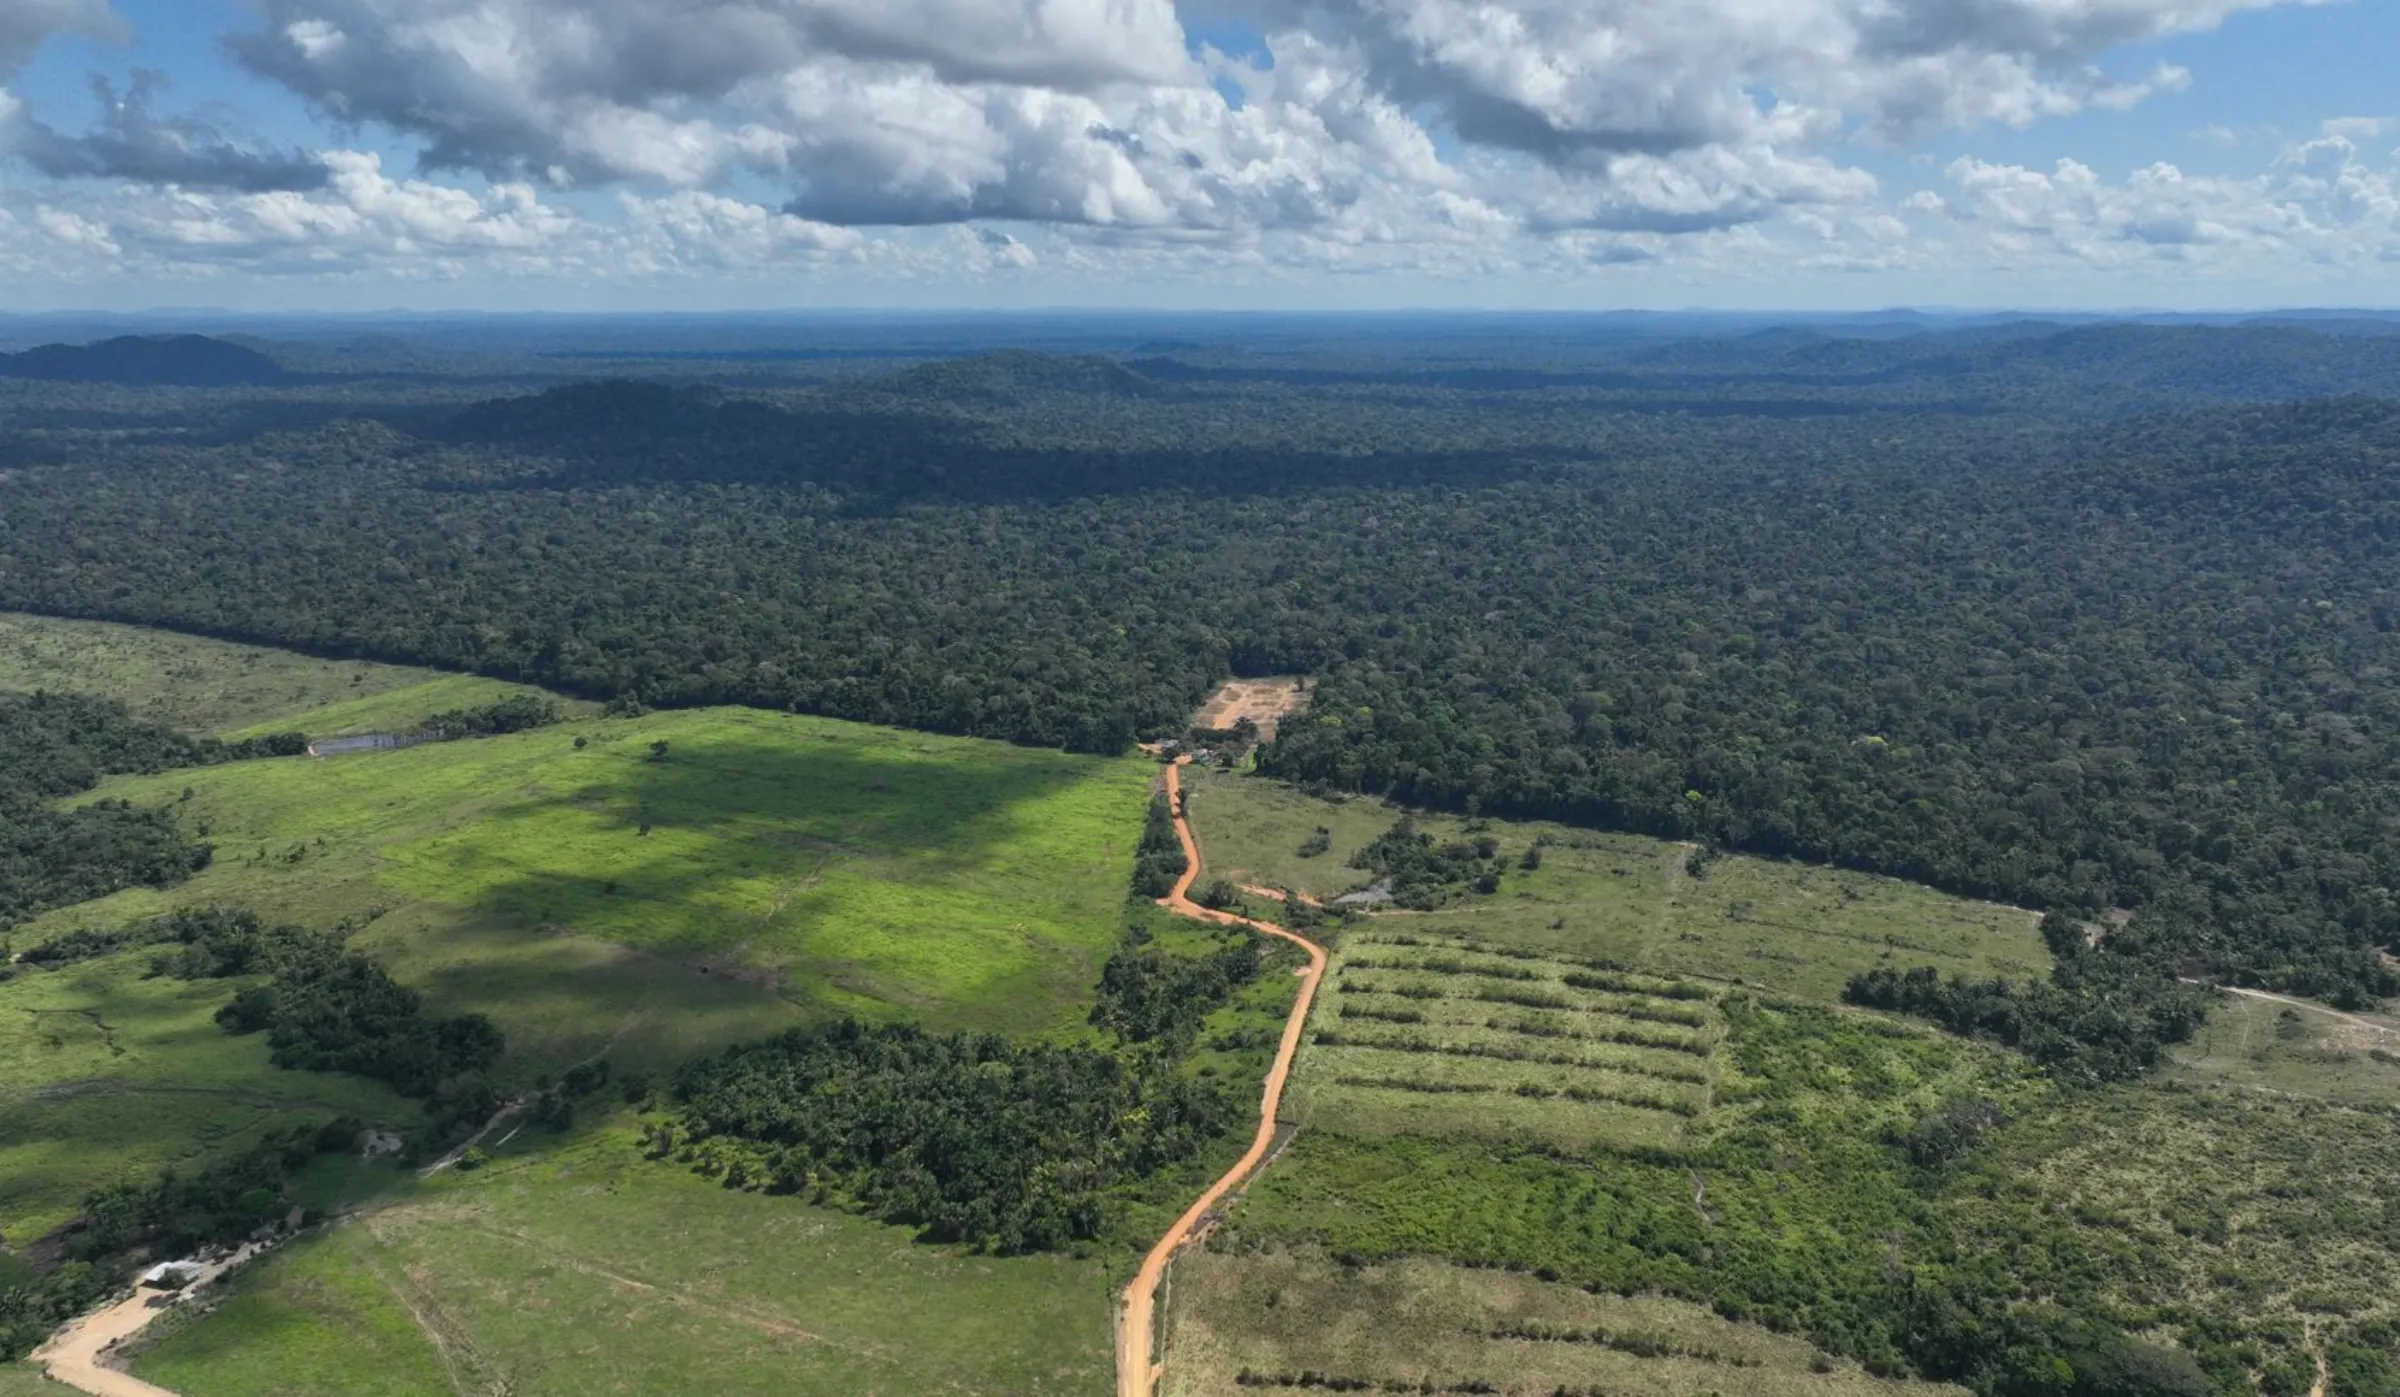 Still from multimedia: Aerial view of rainforest in Brazil